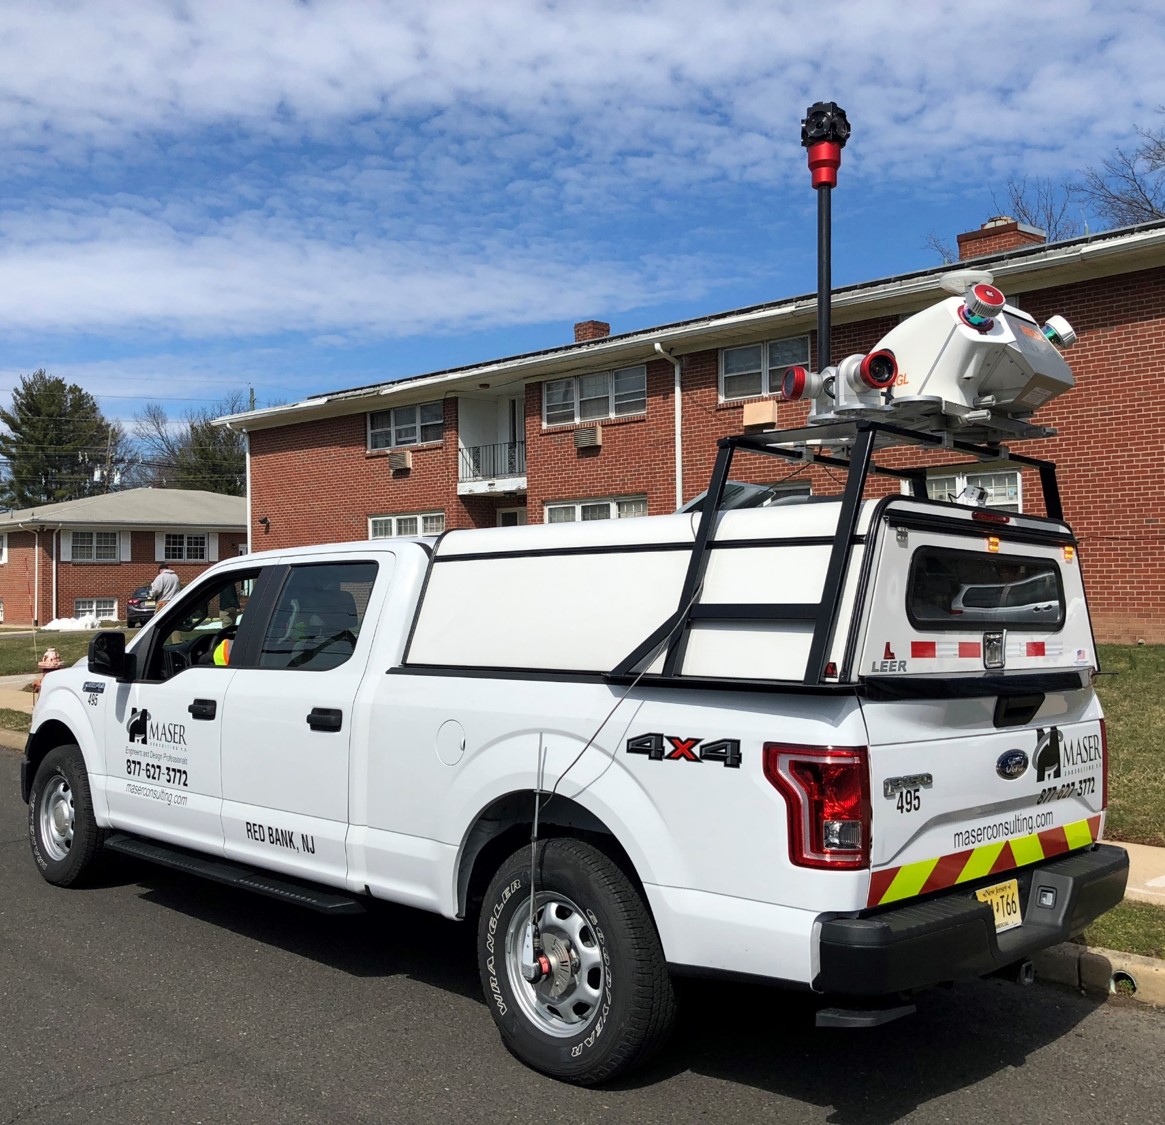 A Maser Consulting truck equipped with mobile LiDAR technology